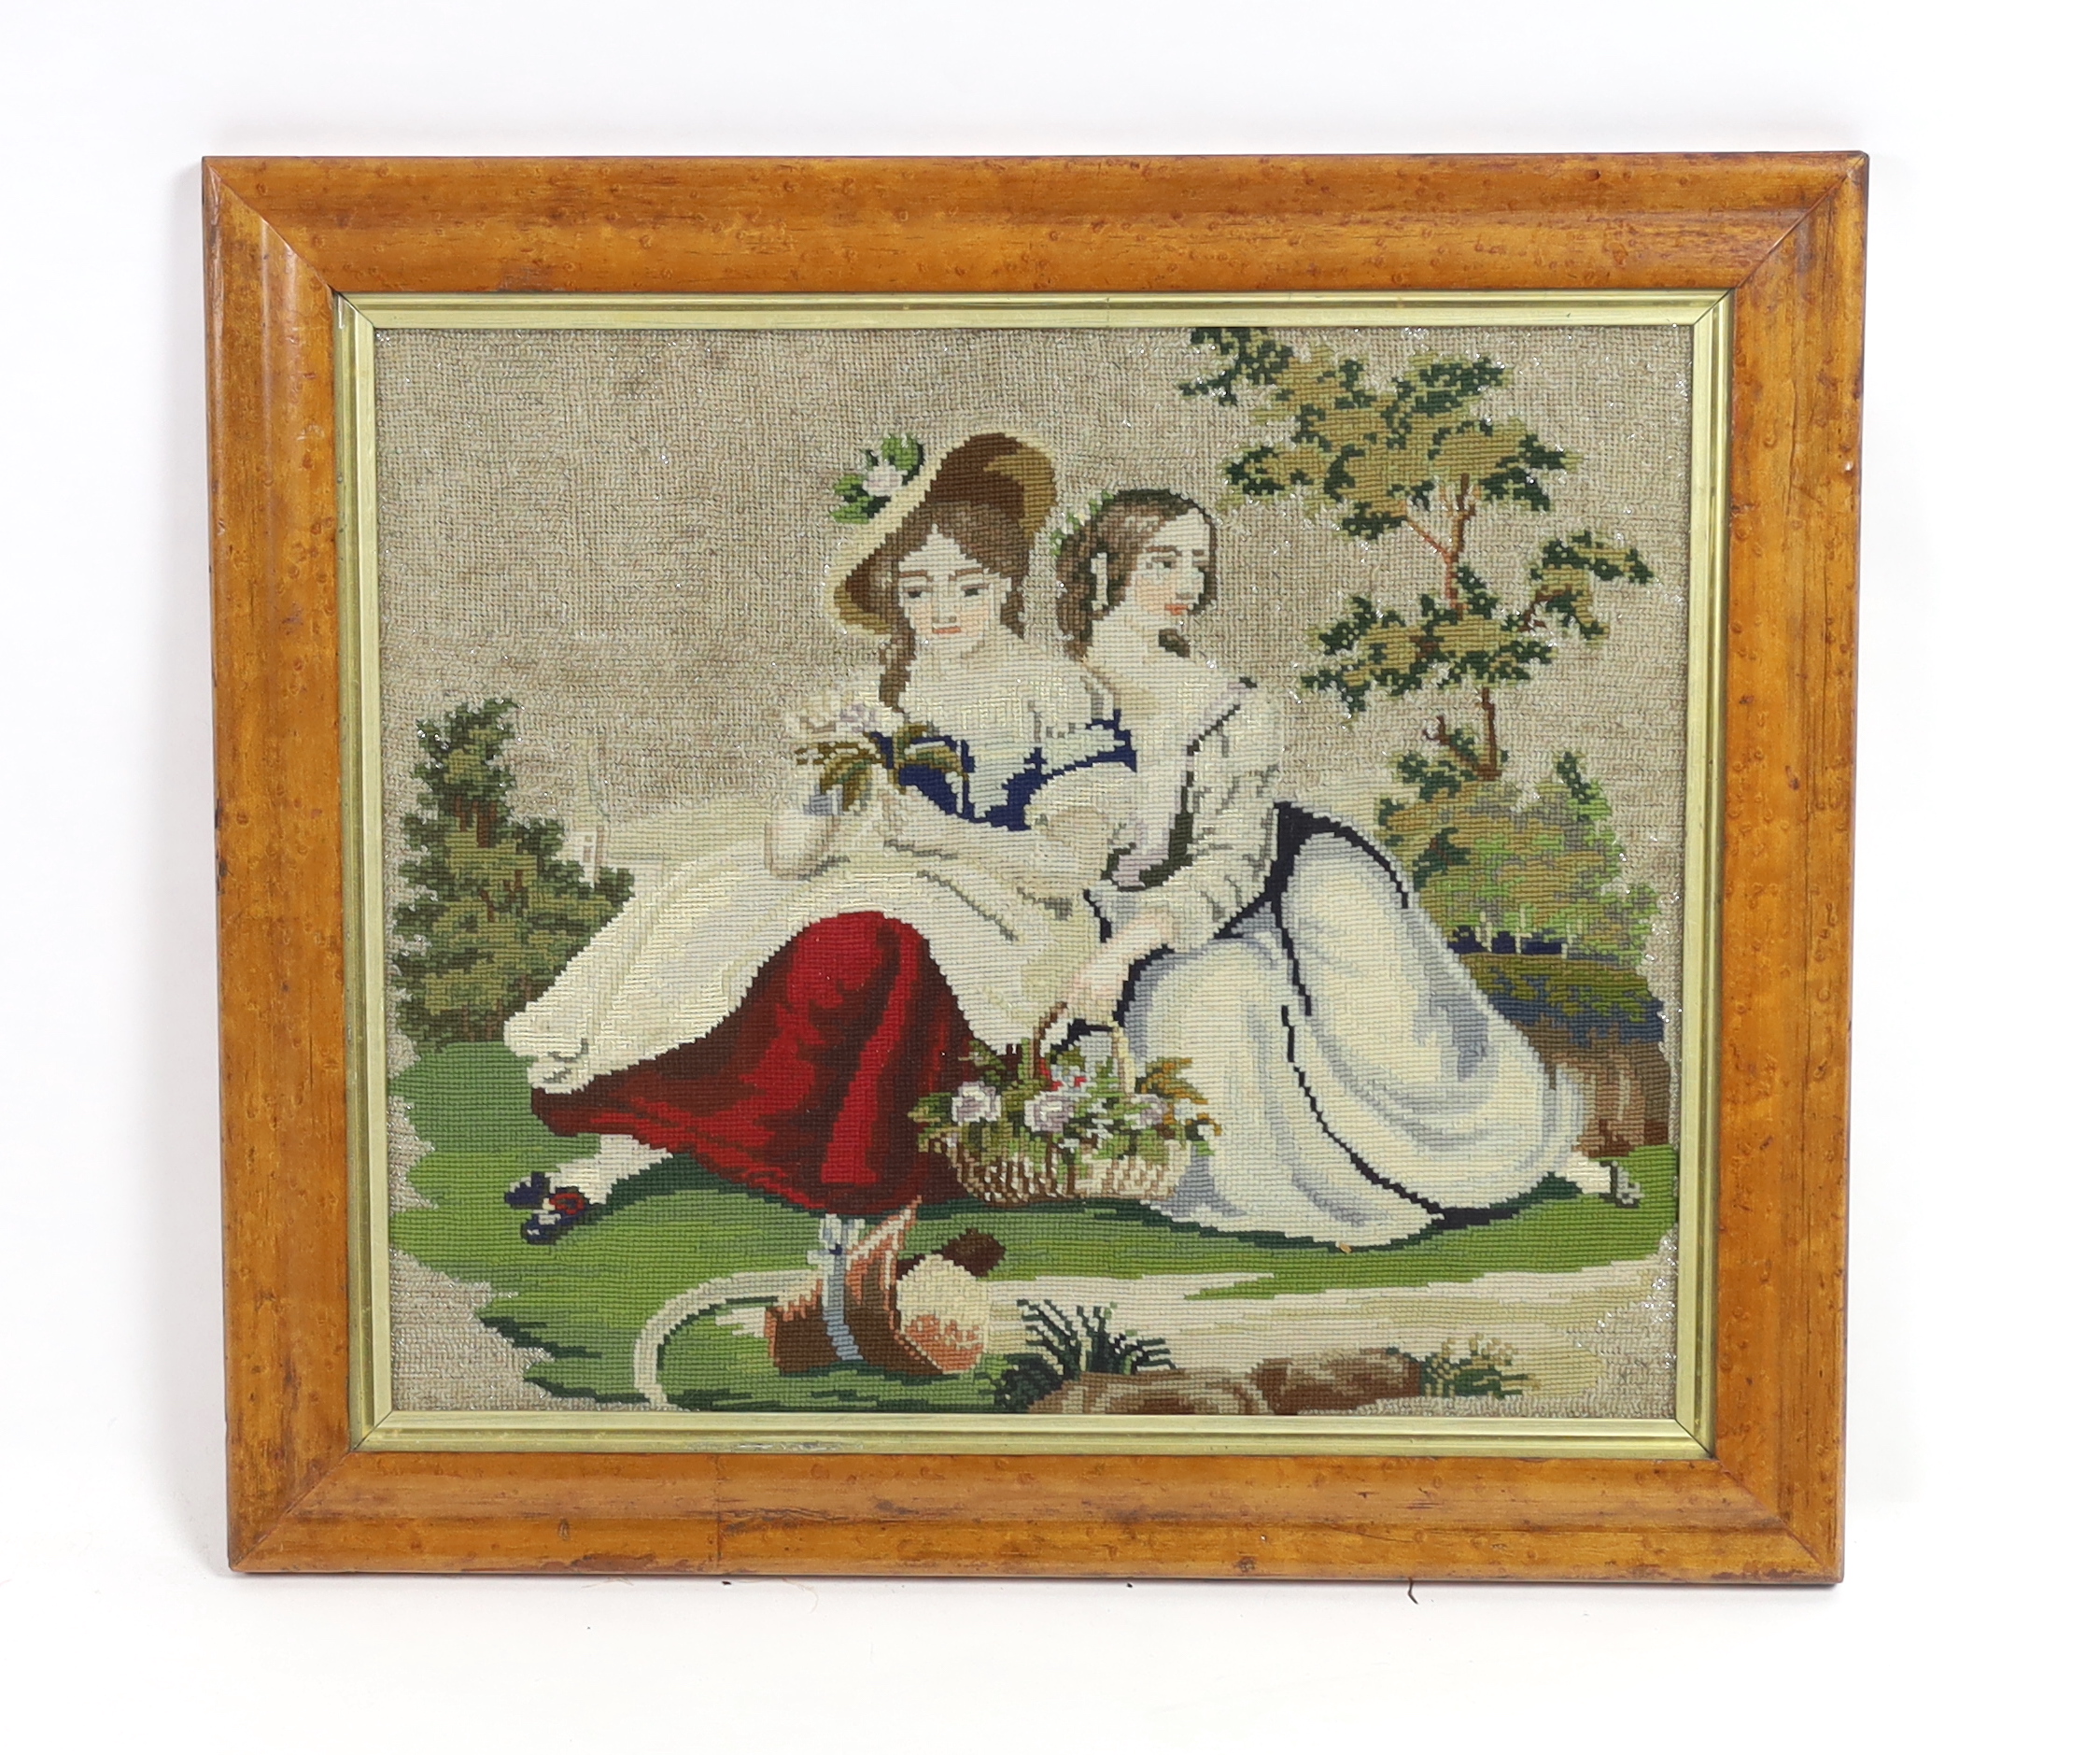 A 19th century maple framed Berlin beadwork embroidery of two young girls, possibly Queen Victoria’s daughters, seated with a basket of flowers in a garden, the sky embroidered with white beads, 49cm wide x 42cm high